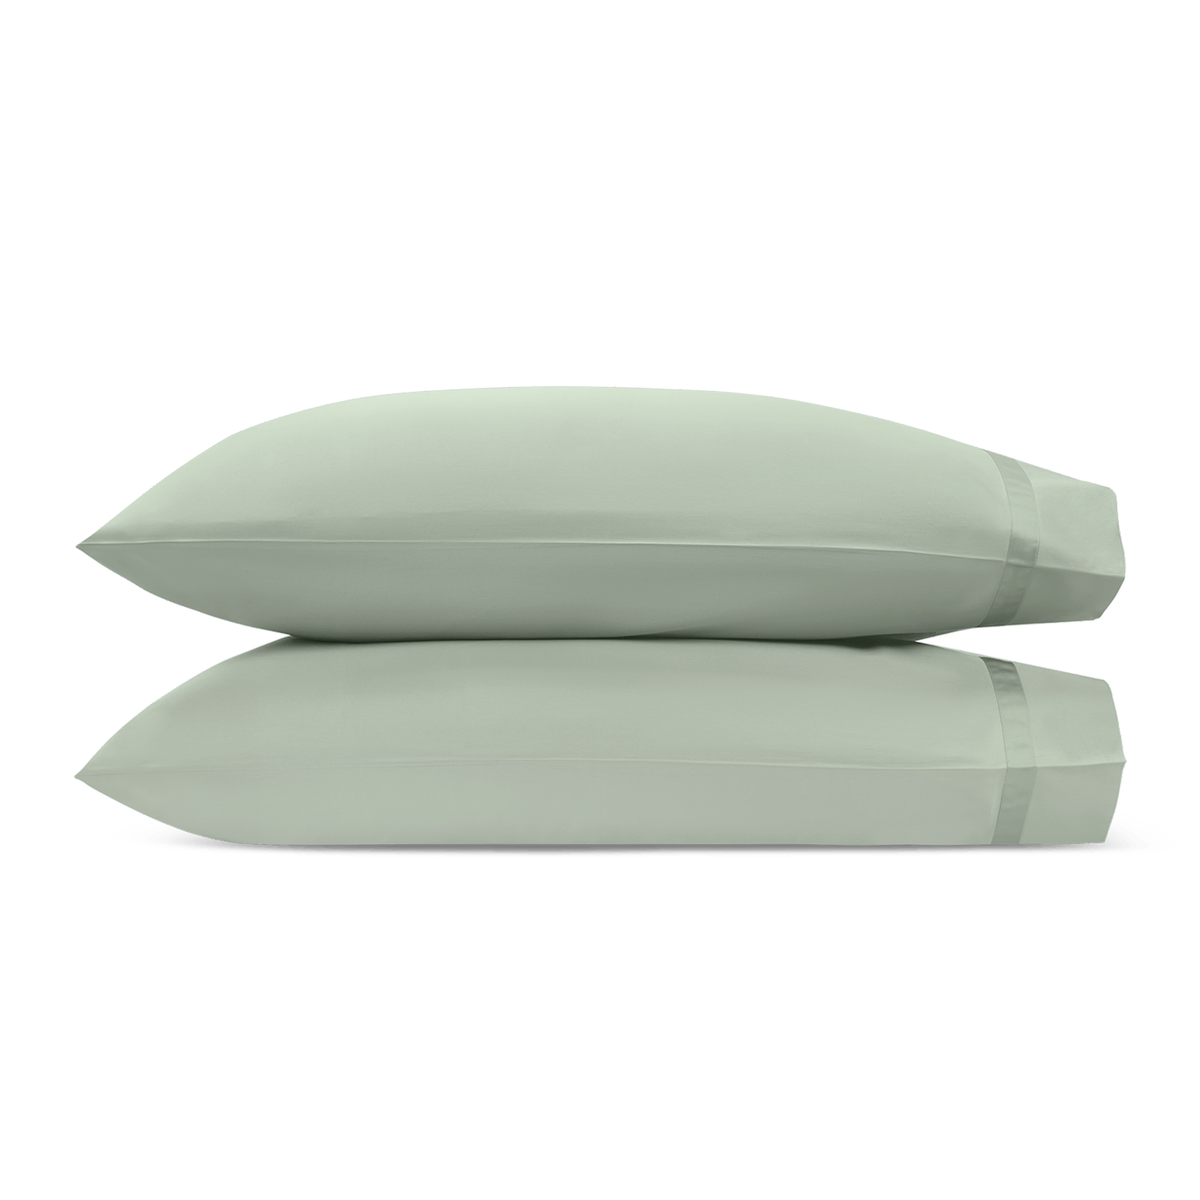 Pair of Pillowcase of Matouk Nocturne Bedding Collection in Color Celadon